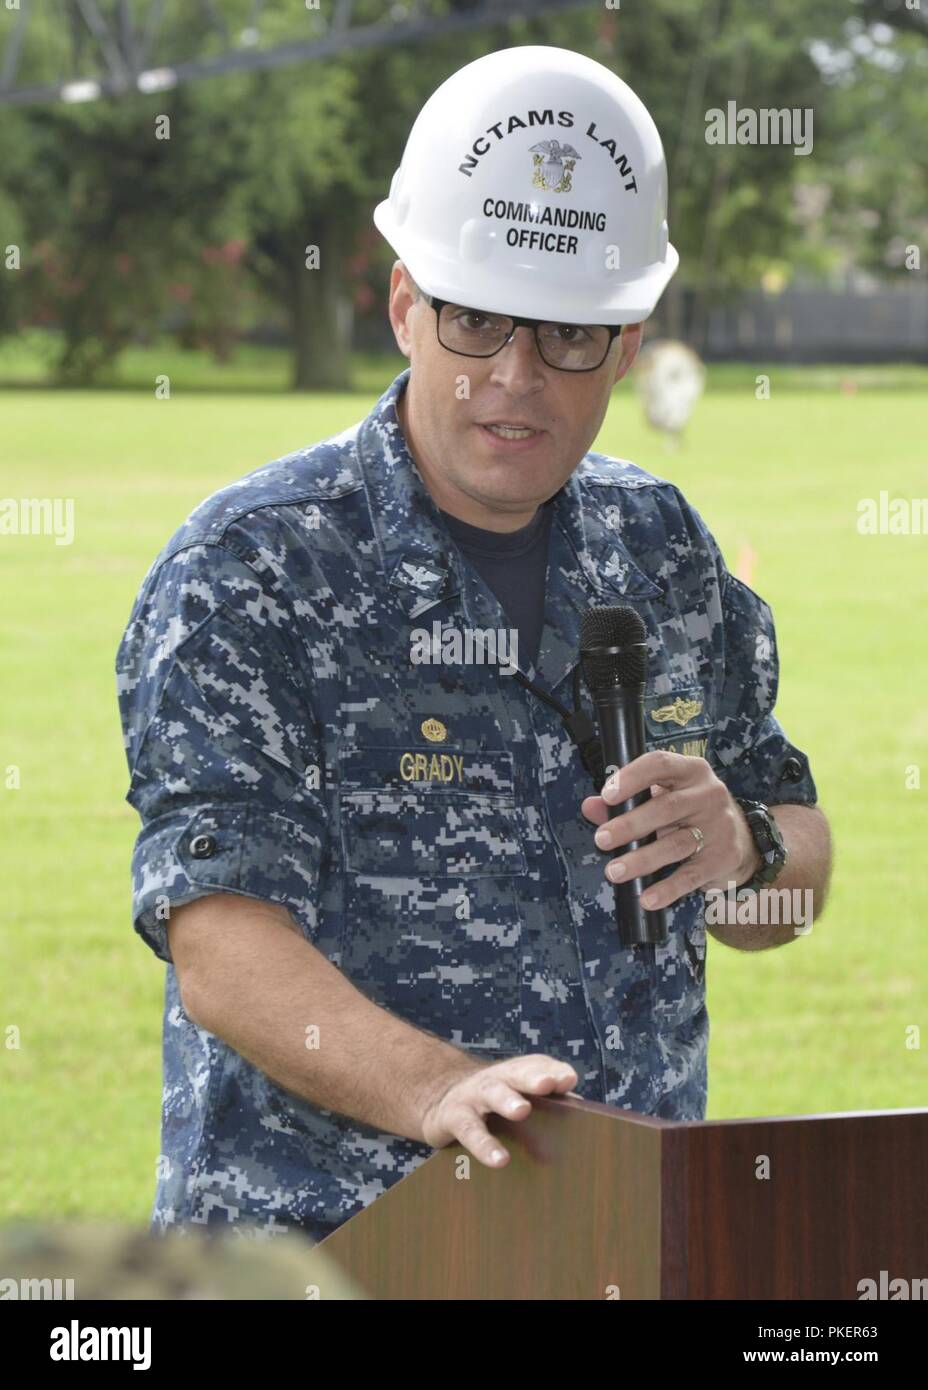 Captain Jody Grady, Commanding Officer, Naval Computer and Telecommunications Area Master Station Atlantic (NCTAMS LANT) speaks at the Groundbreaking Ceremony on Norfolk Naval Station, to officially commence the P913 site project of NCTAMS LANT’s new building.  The ceremony was conducted Thursday, July 26 at 9 a.m. across from the base’s parade field where the new building will be located.  NCTAMS LANT’s mission is to operate and defend responsive, resilient, and secure computer and telecommunications systems, providing information superiority for global maritime and joint forces. U.S. Navy Stock Photo